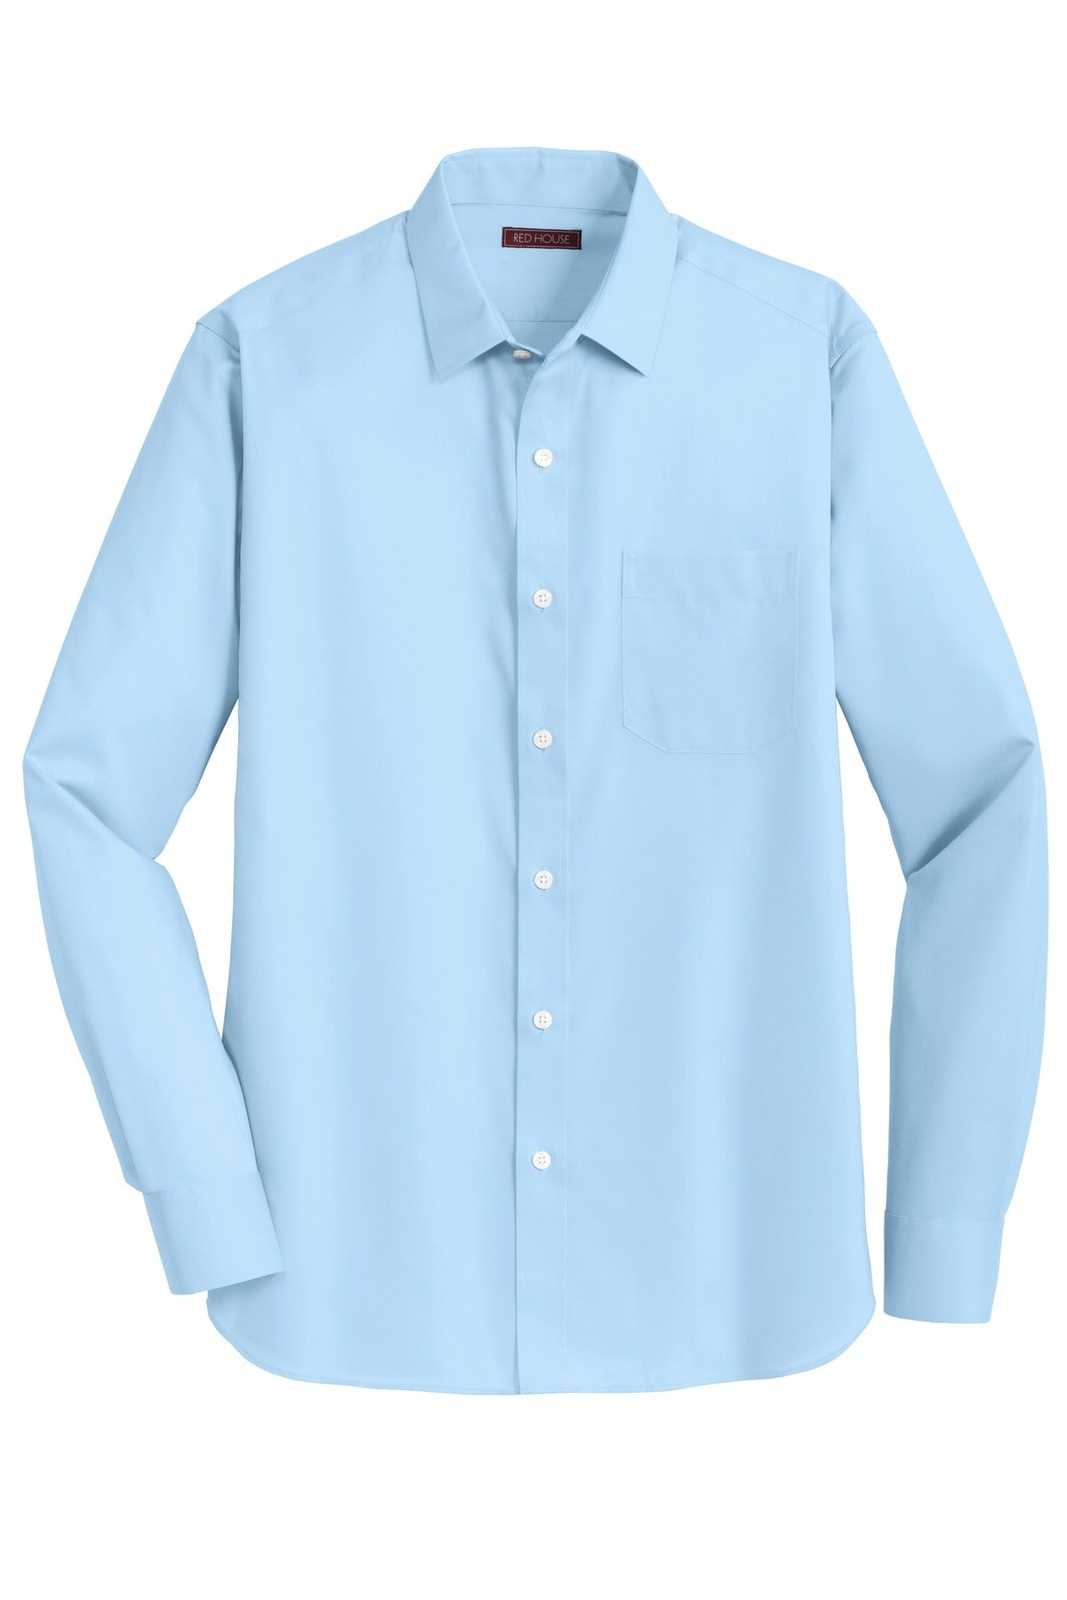 Red House RH80 Slim Fit Non-Iron Twill Shirt - Heritage Blue - HIT a Double - 5